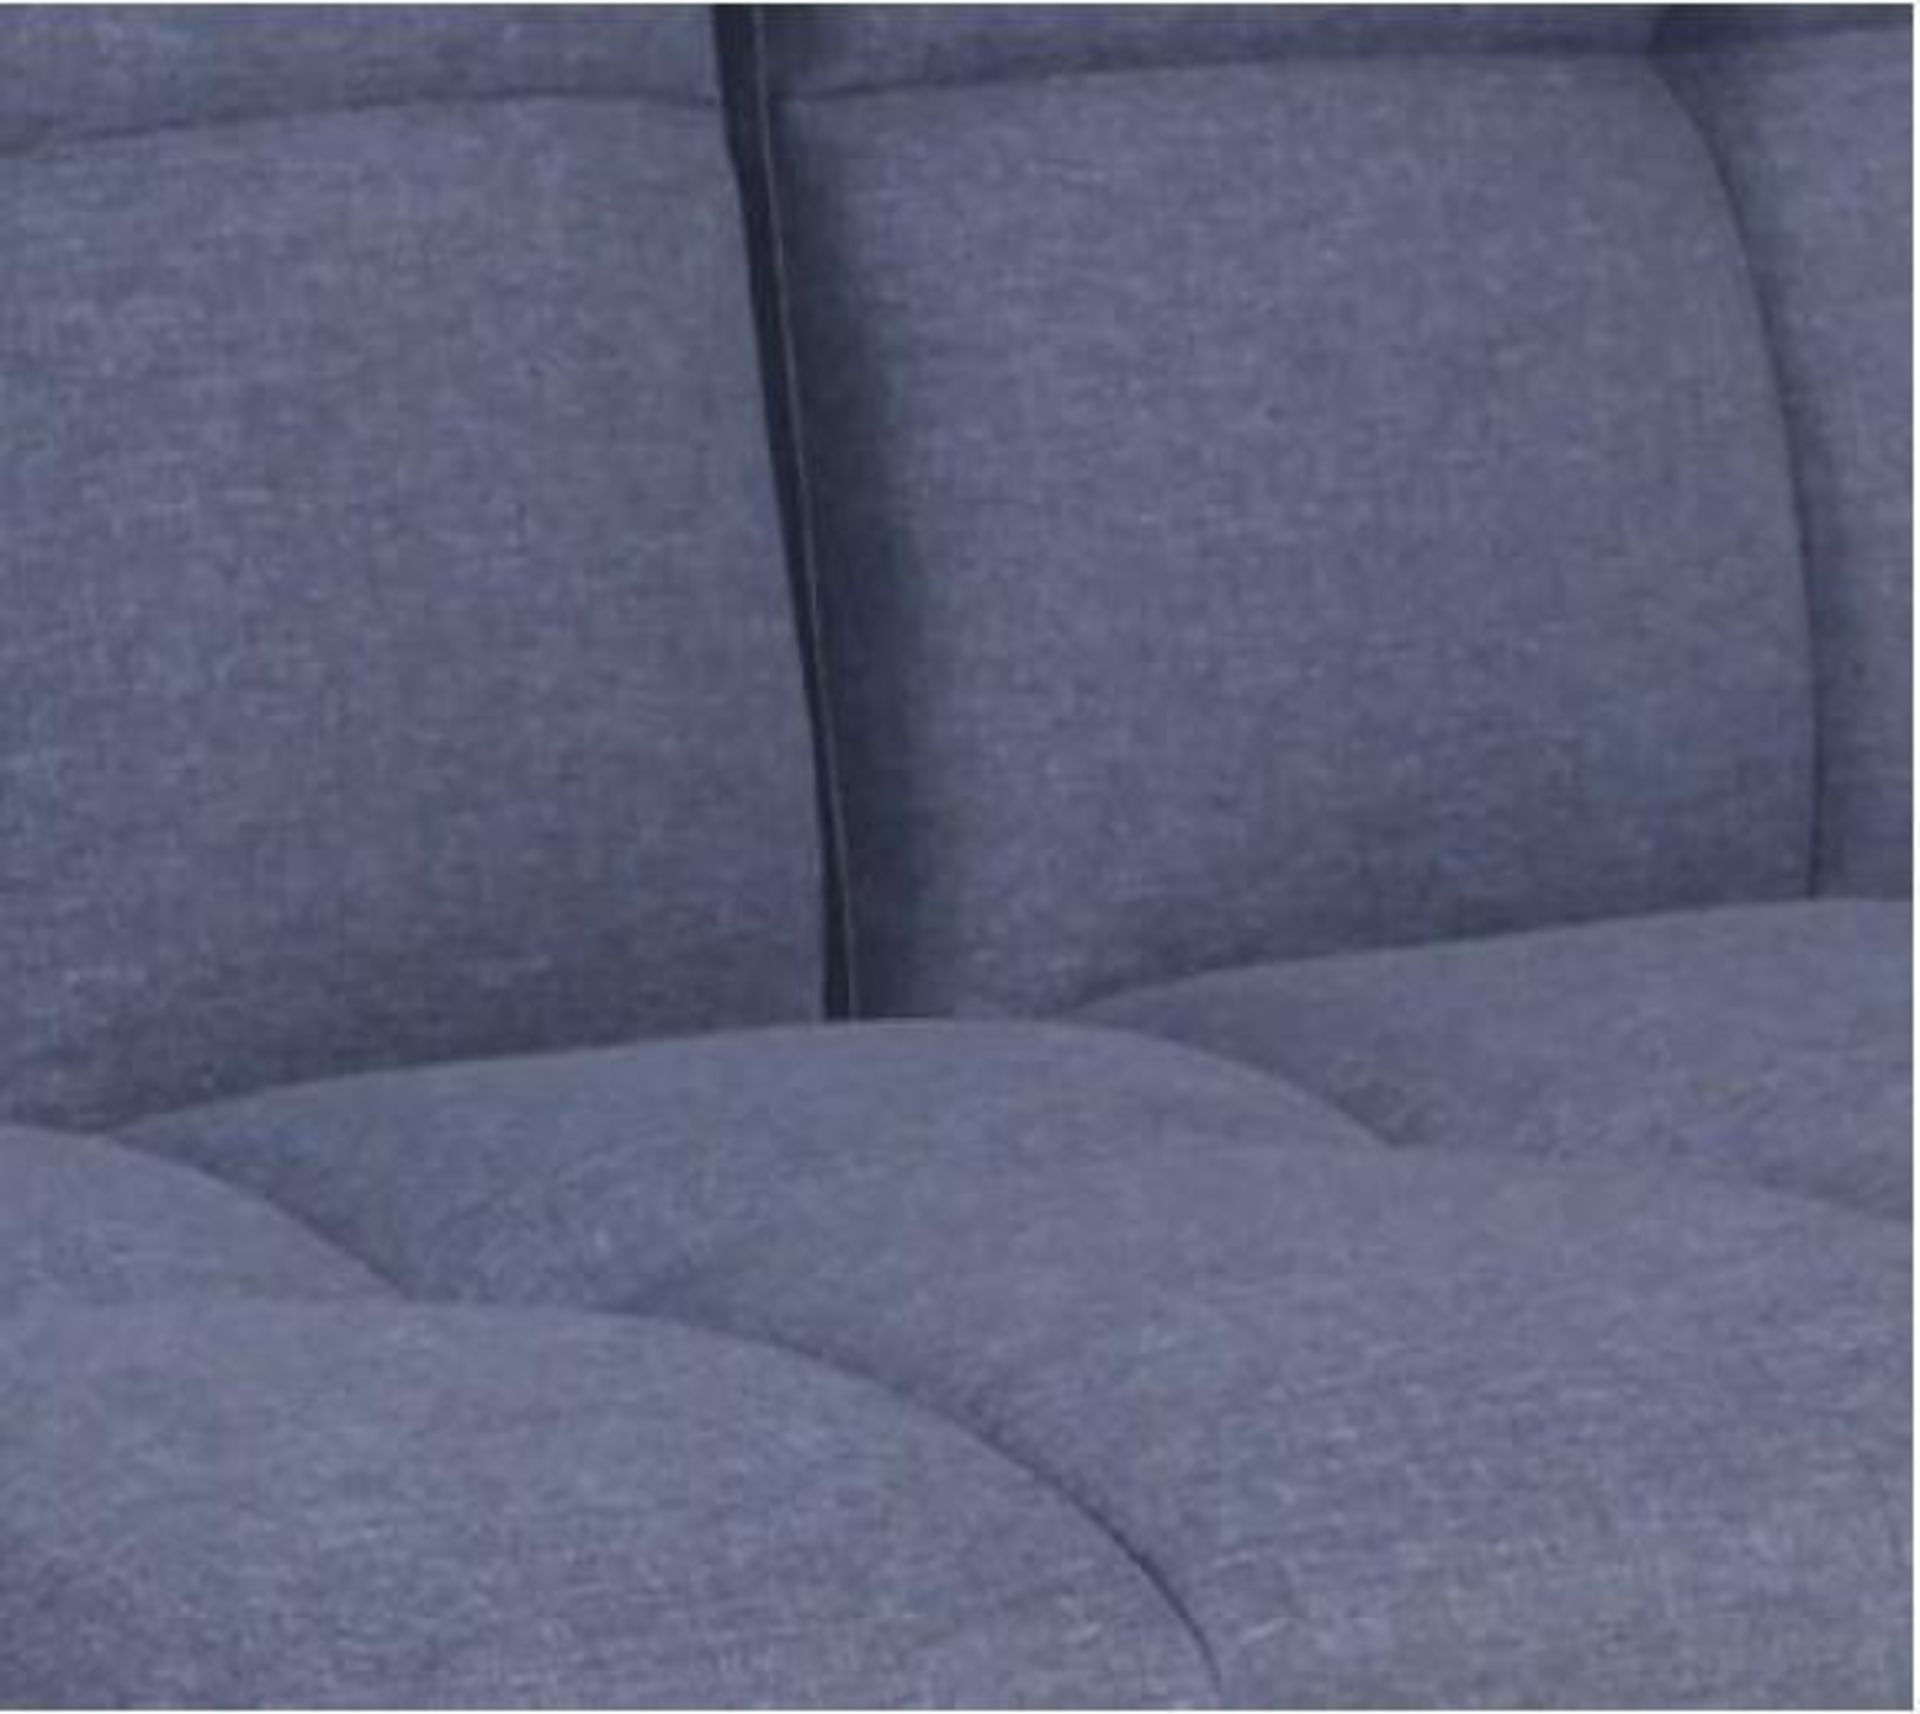 *NO VAT ON HAMMER* Brand new Boxed 2 Seater Clic Clac USB Sofa Bed - Image 8 of 10